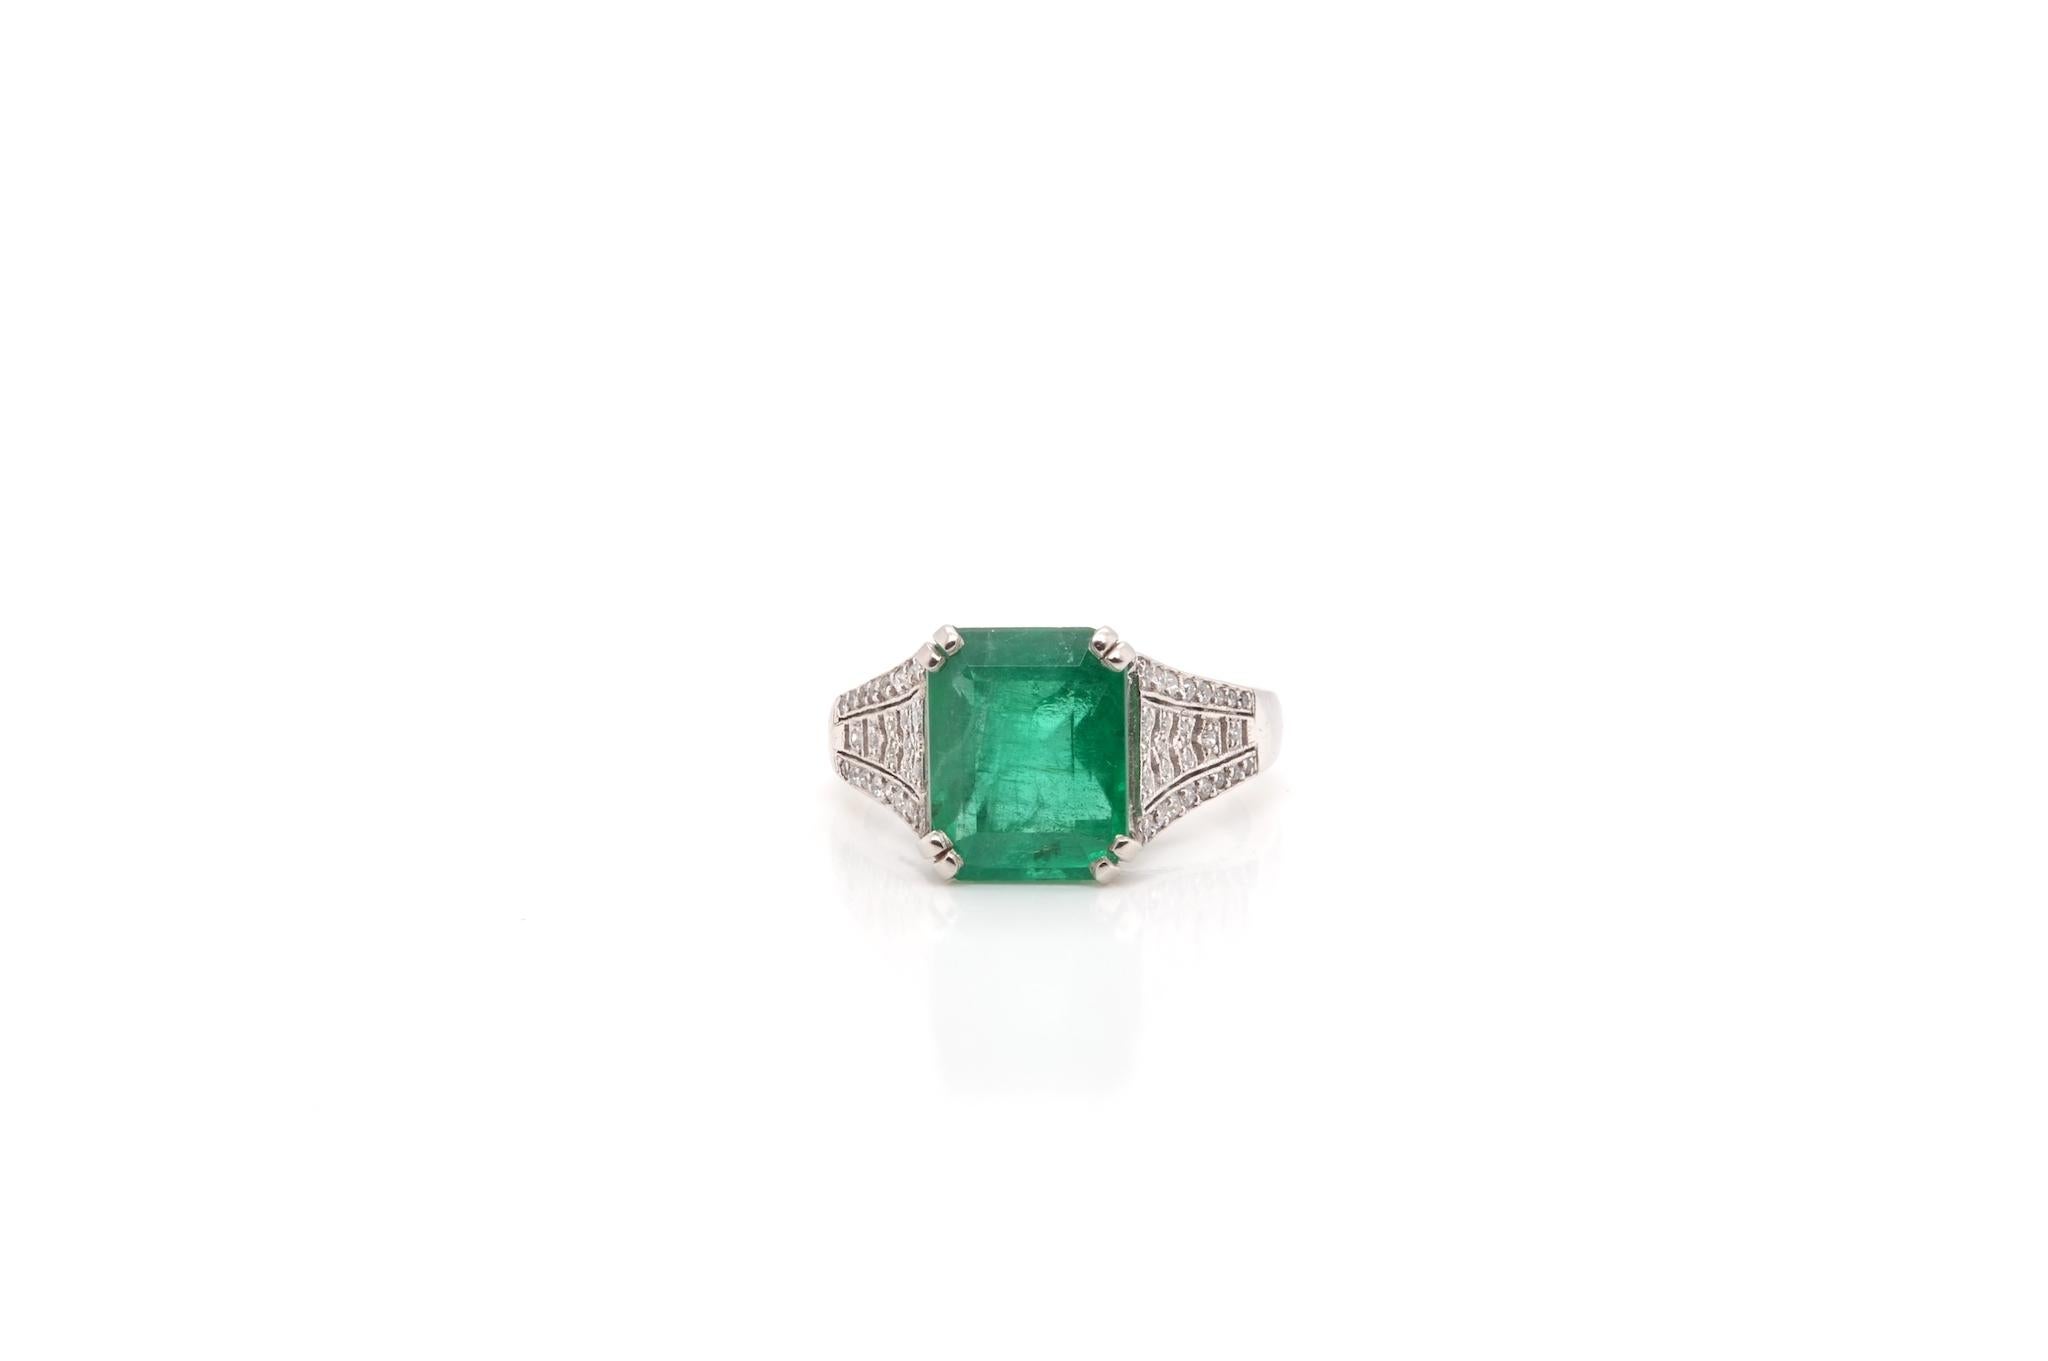 Stones: Emerald of 3.53 carats and diamonds for a total weight of 0.15 carat.
Material: Platinum
Dimensions: 10 mm length on finger,
7mm in height.
Weight: 5.6g
Size: 51 (free sizing)
Certificate
Ref. : 21498 / 23389